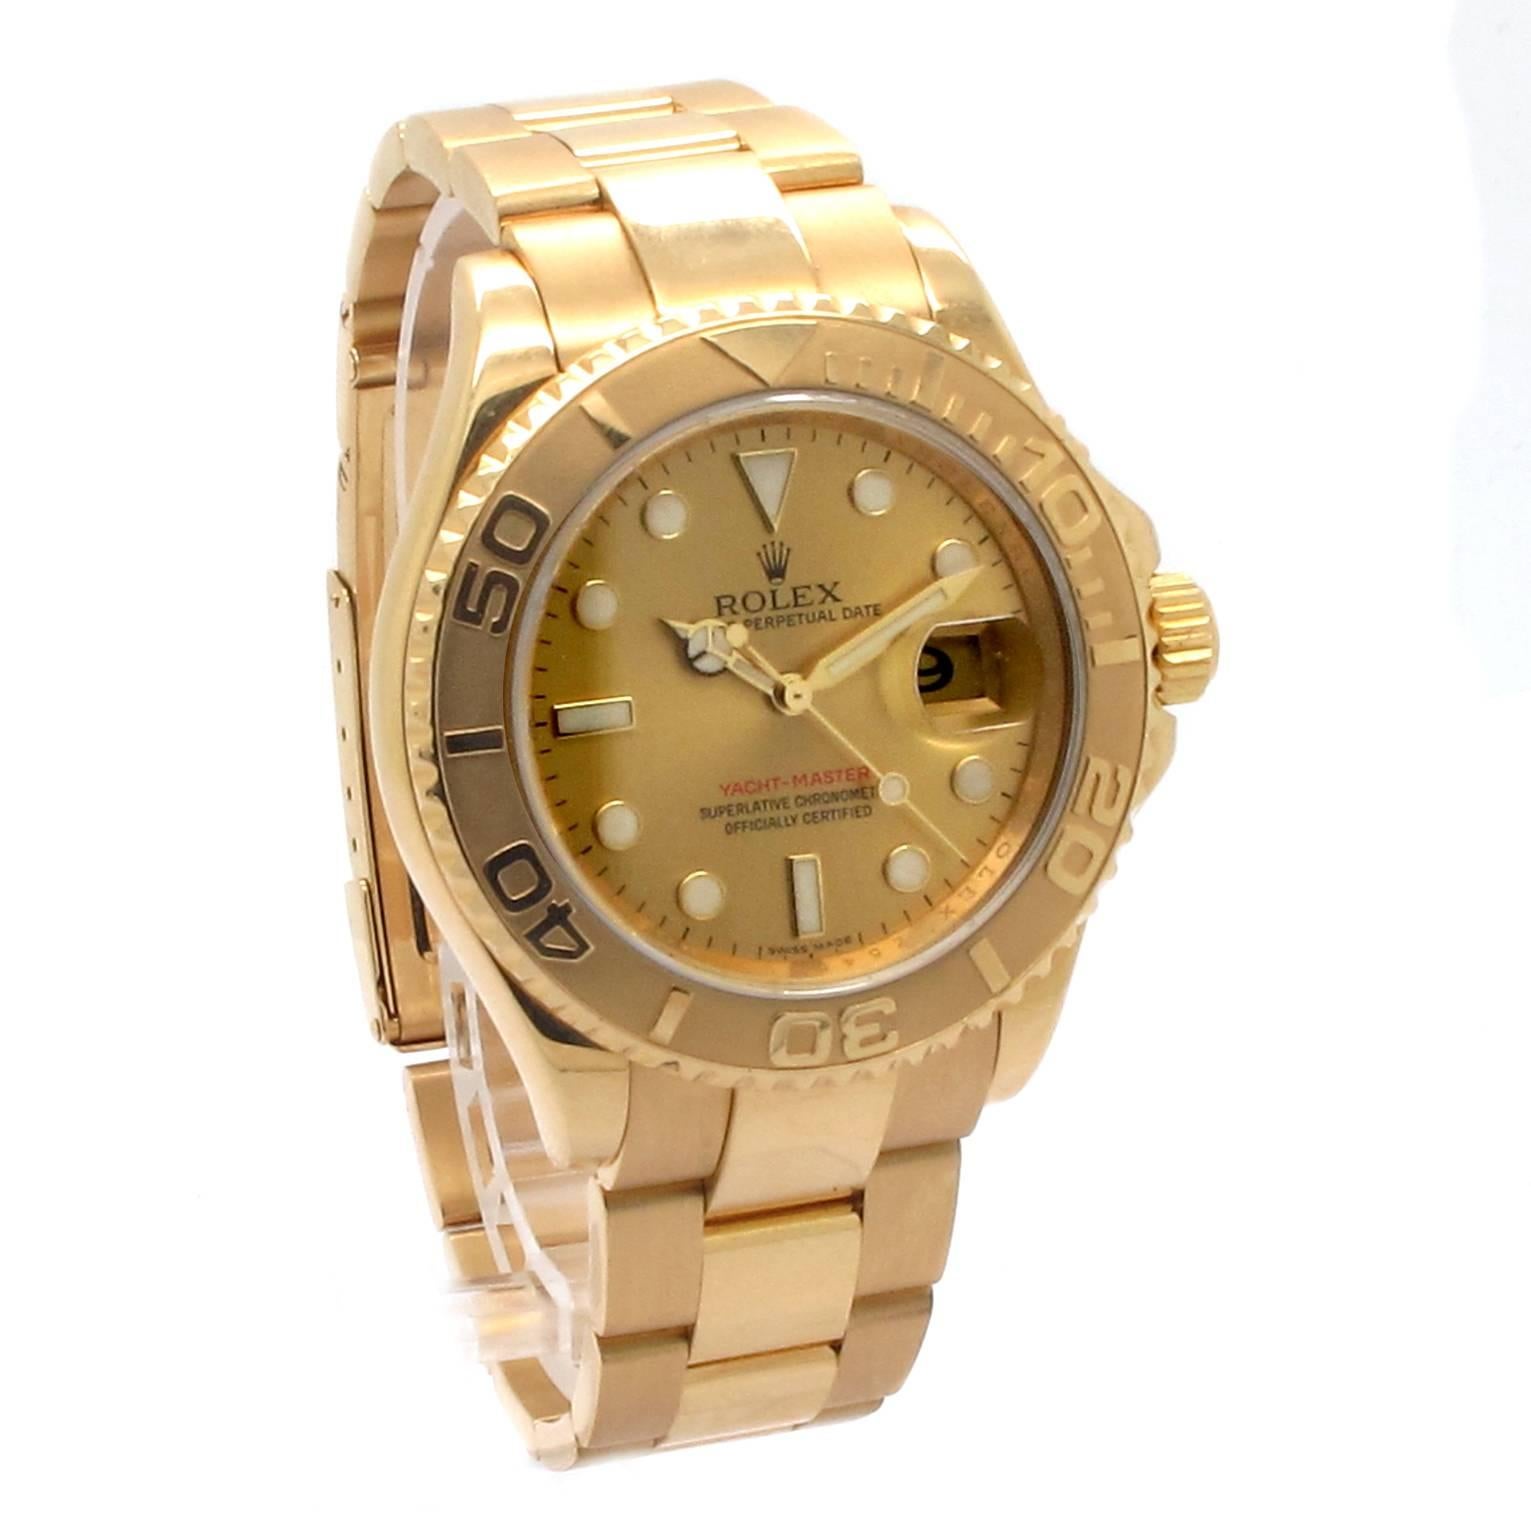 18kt yellow gold case and bracelet. Unidirectional rotating bezel. Champagne dial with luminous hands and luminous dots hour markers. Minute markers around the outer rim. Luminescent hands and dial markers. Date displays at the 3 o'clock position.